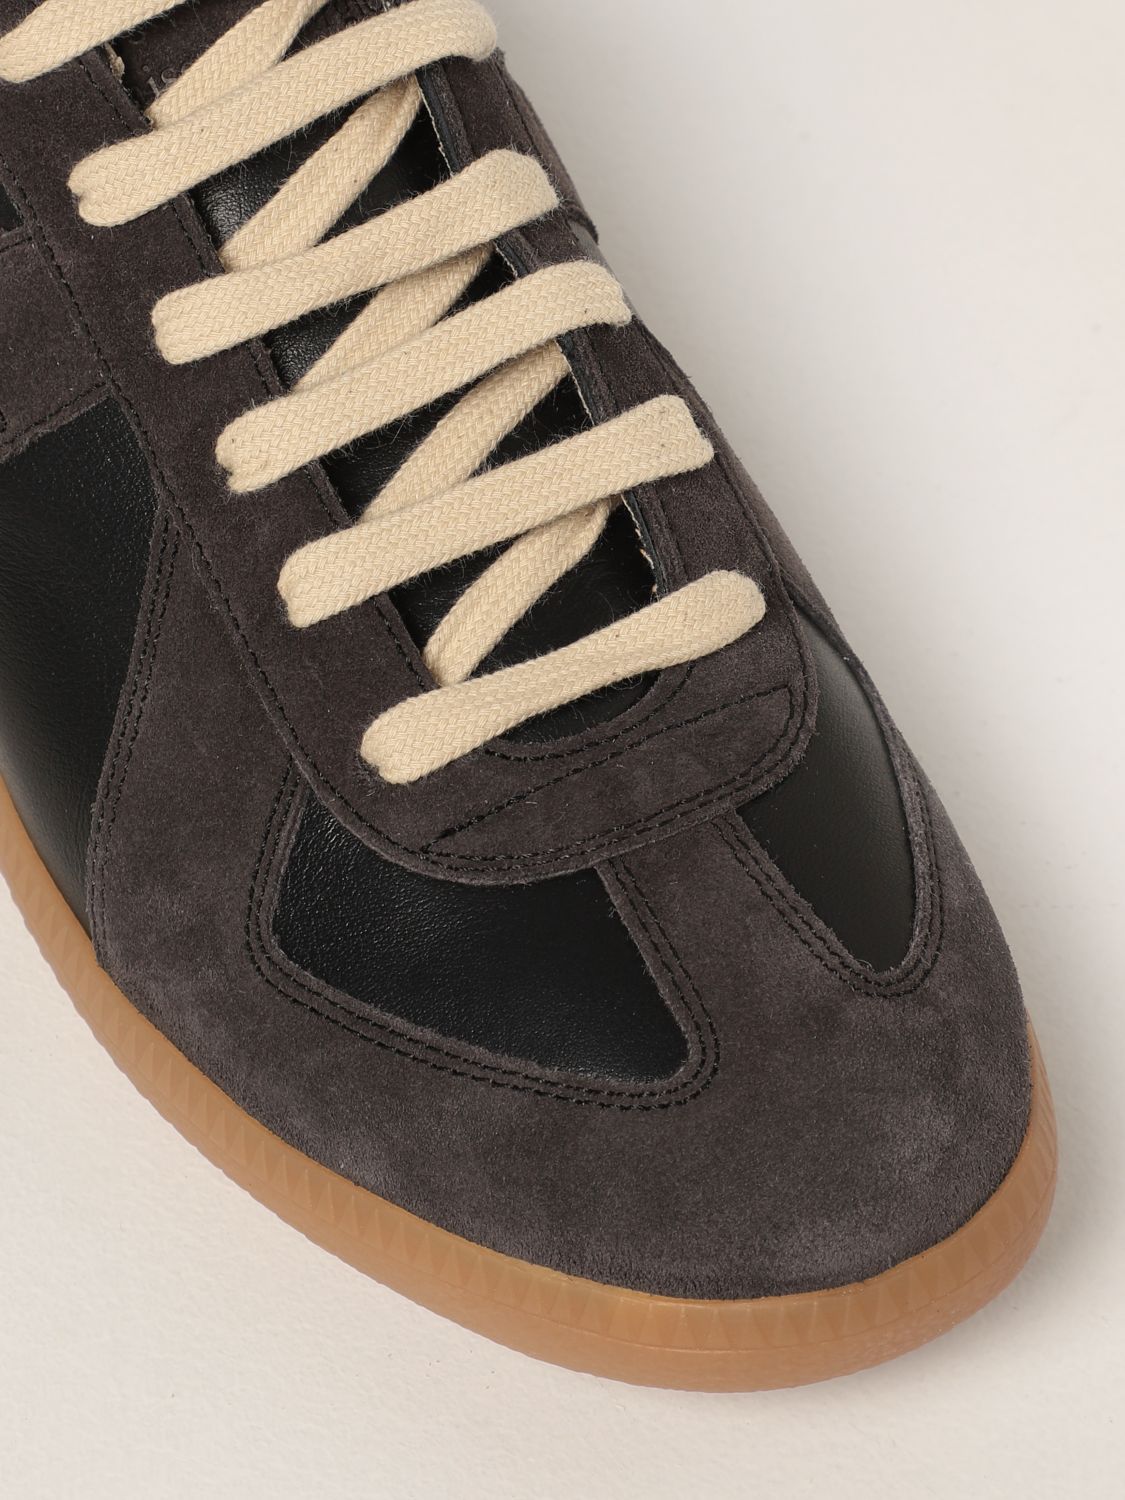 Sneakers Maison Margiela: Replica Maison Margiela sneakers in leather and suede black 4